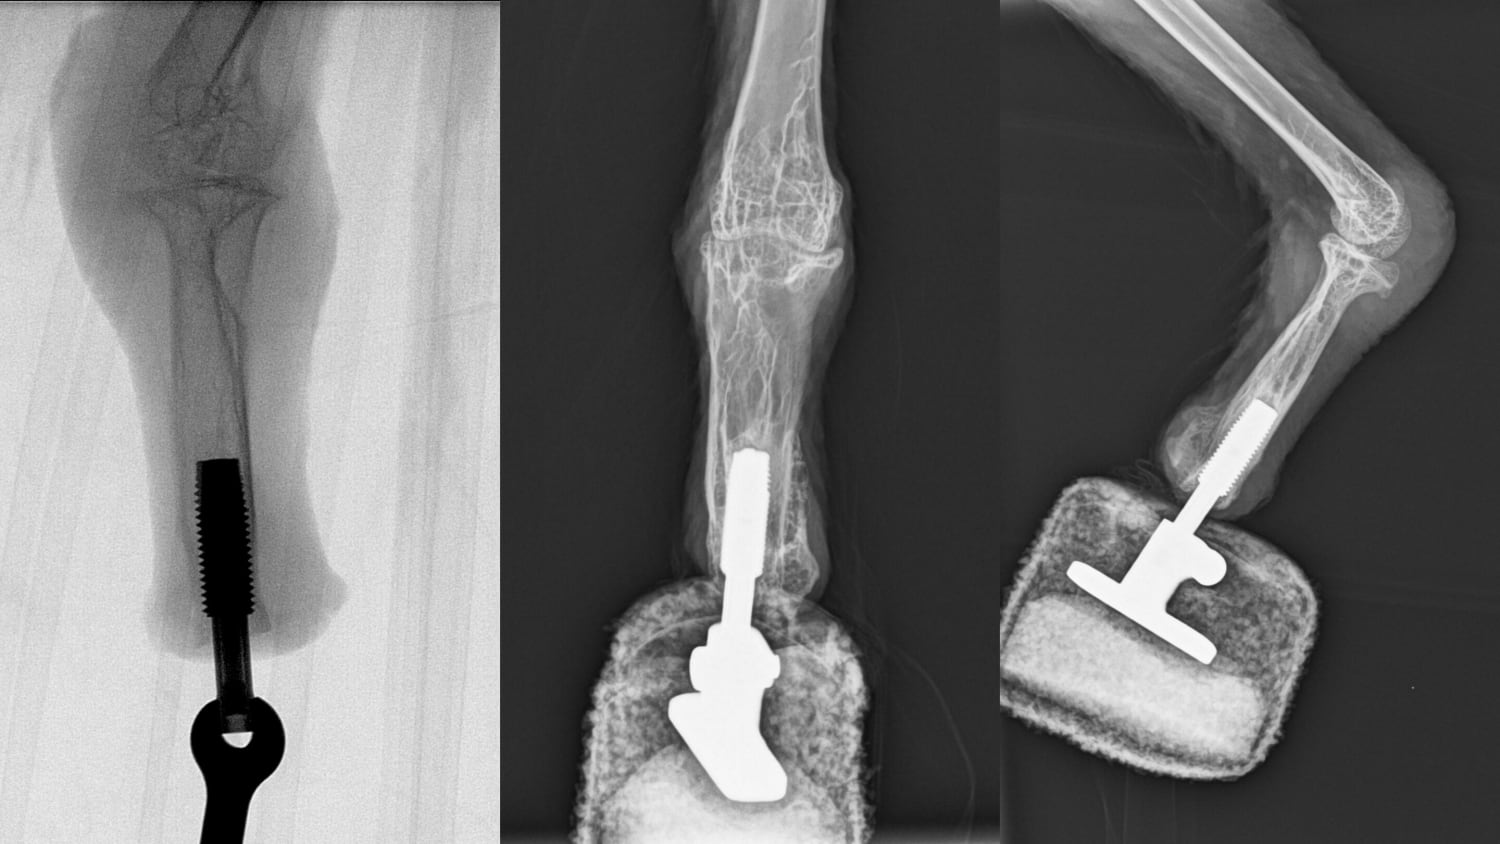 Bionic reconstruction: New foot for 'Mia' the bearded vulture